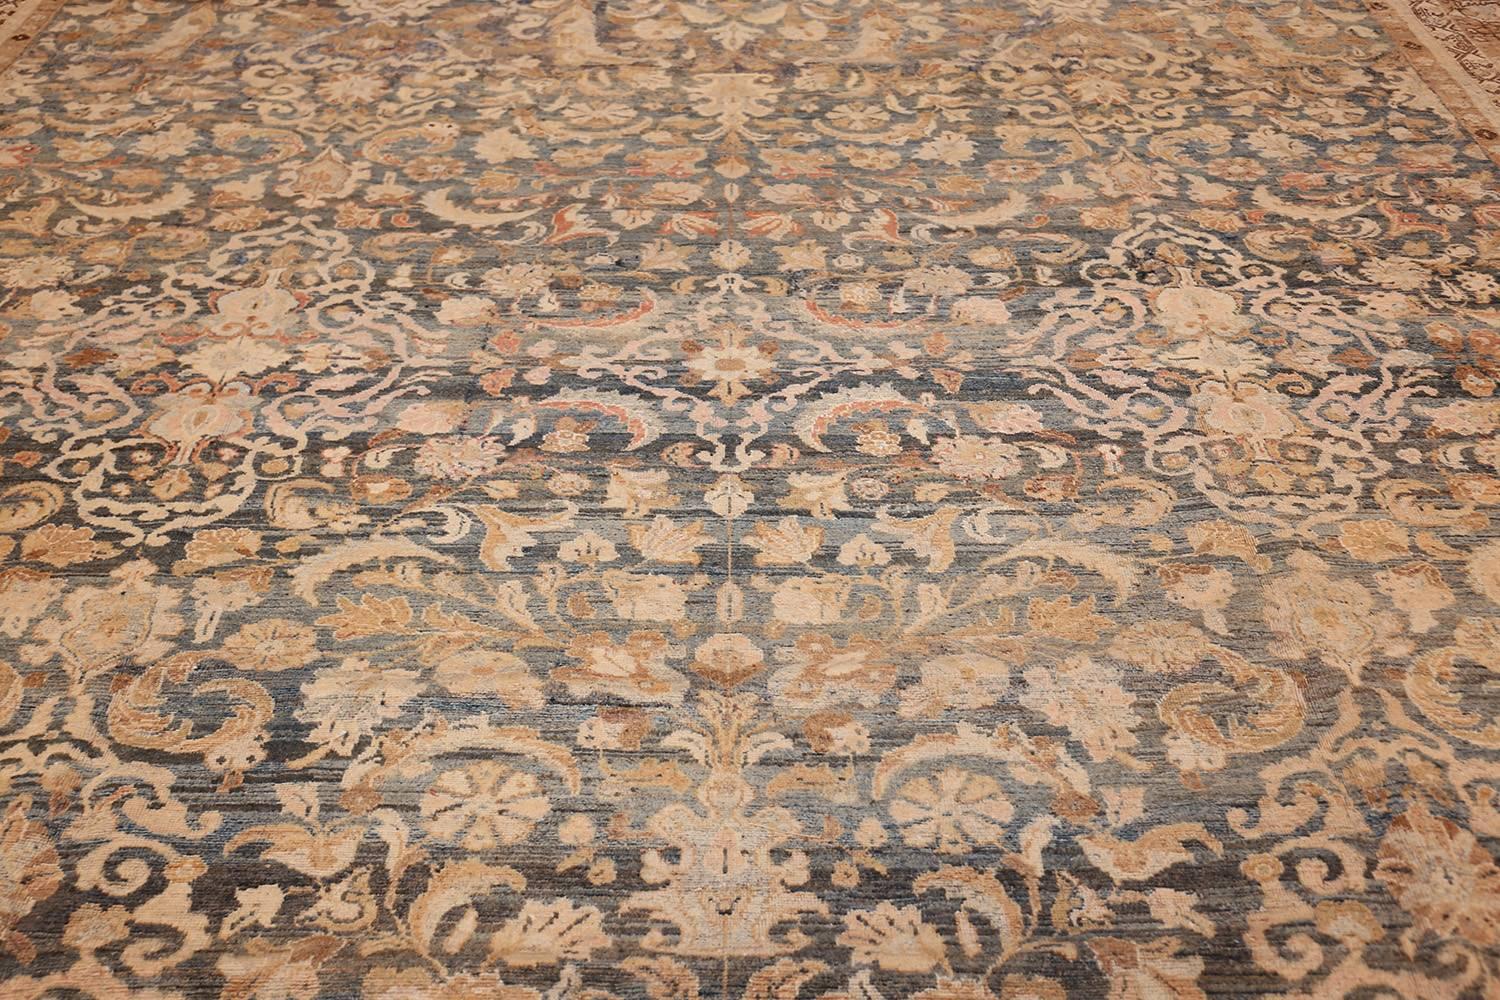 Beautiful Large and Decorative Antique Persian Malayer Rug, Country of Origin: Persia, Circa Date: Early 20th Century. Size: 12 ft x 18 ft (3.66 m x 5.49 m)

